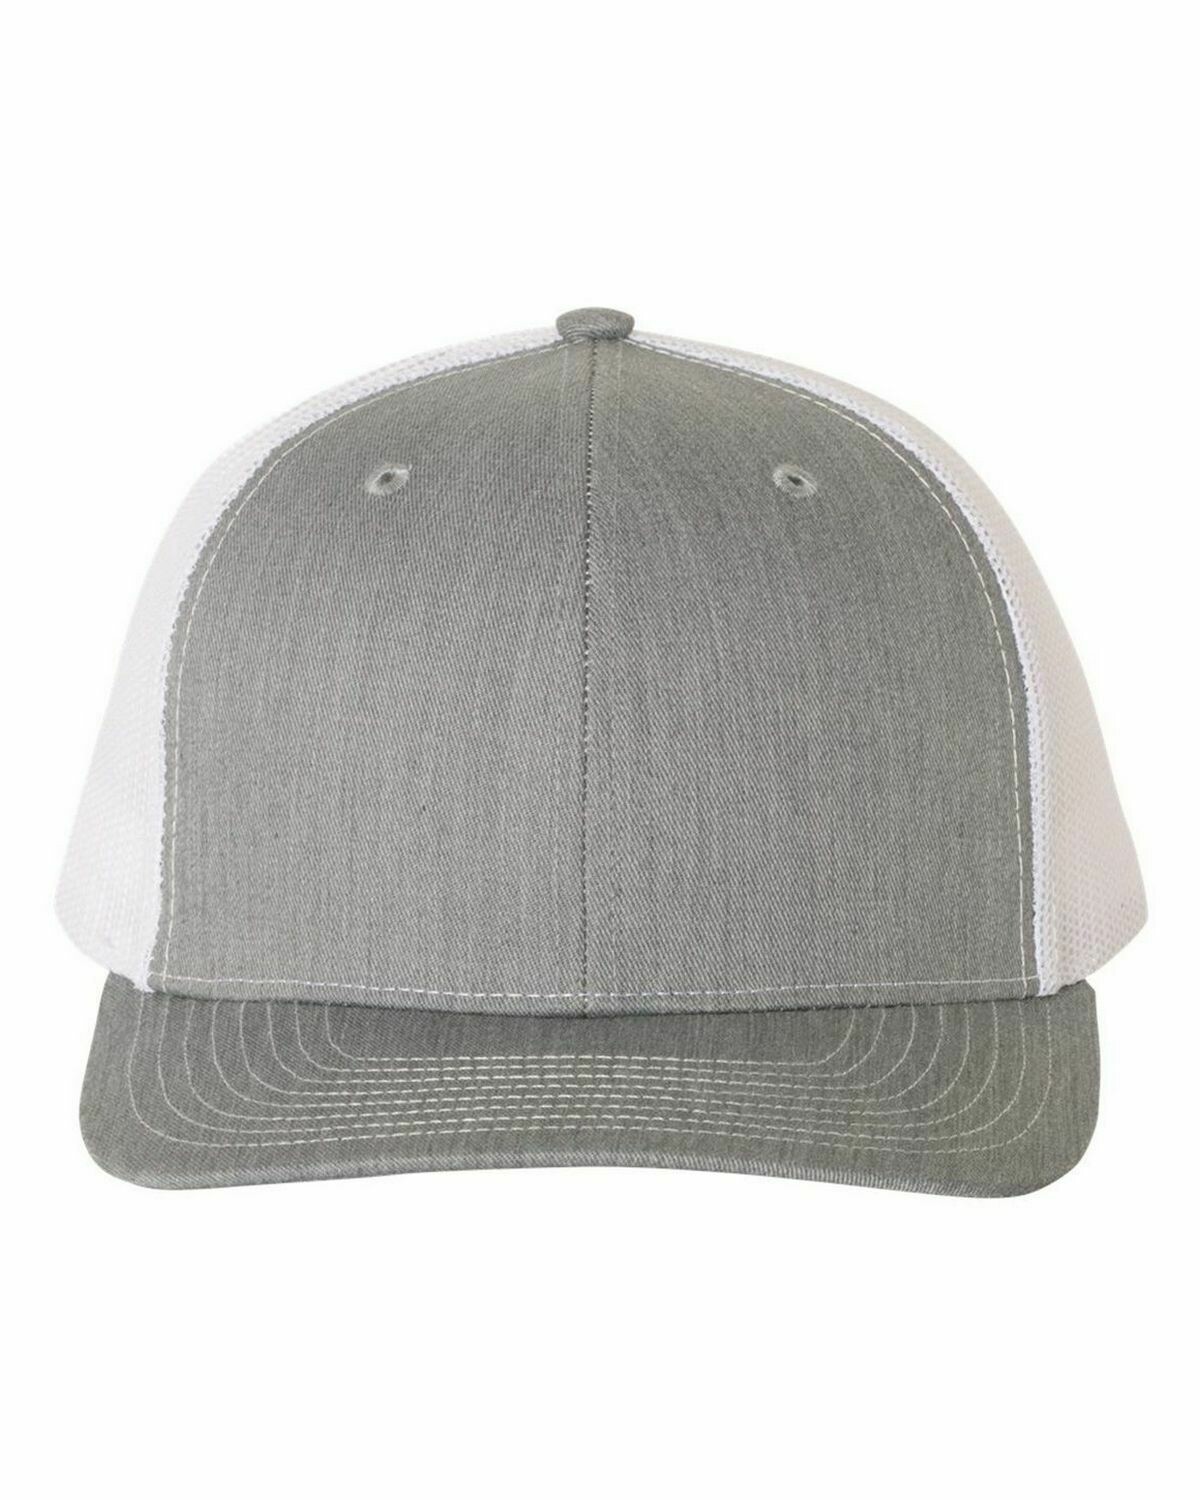 Patch Hat - Heather Gray/White